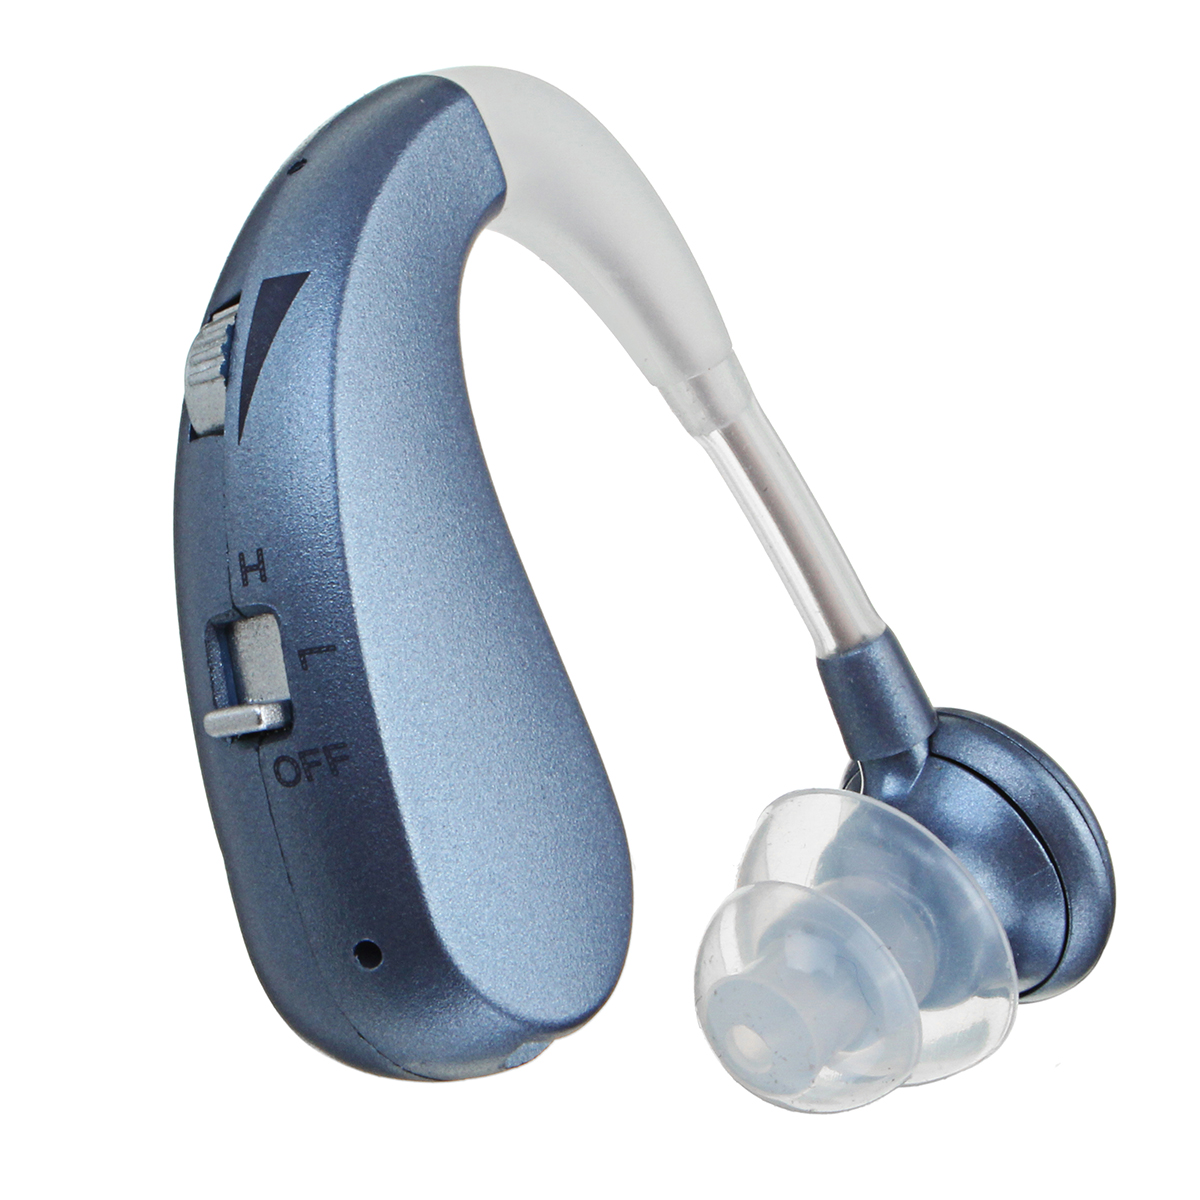 Rechargeable Hearing Aids Hearing Amplifier Noise Reduction Adaptive Feedback Cancellation - Light Blue Colour